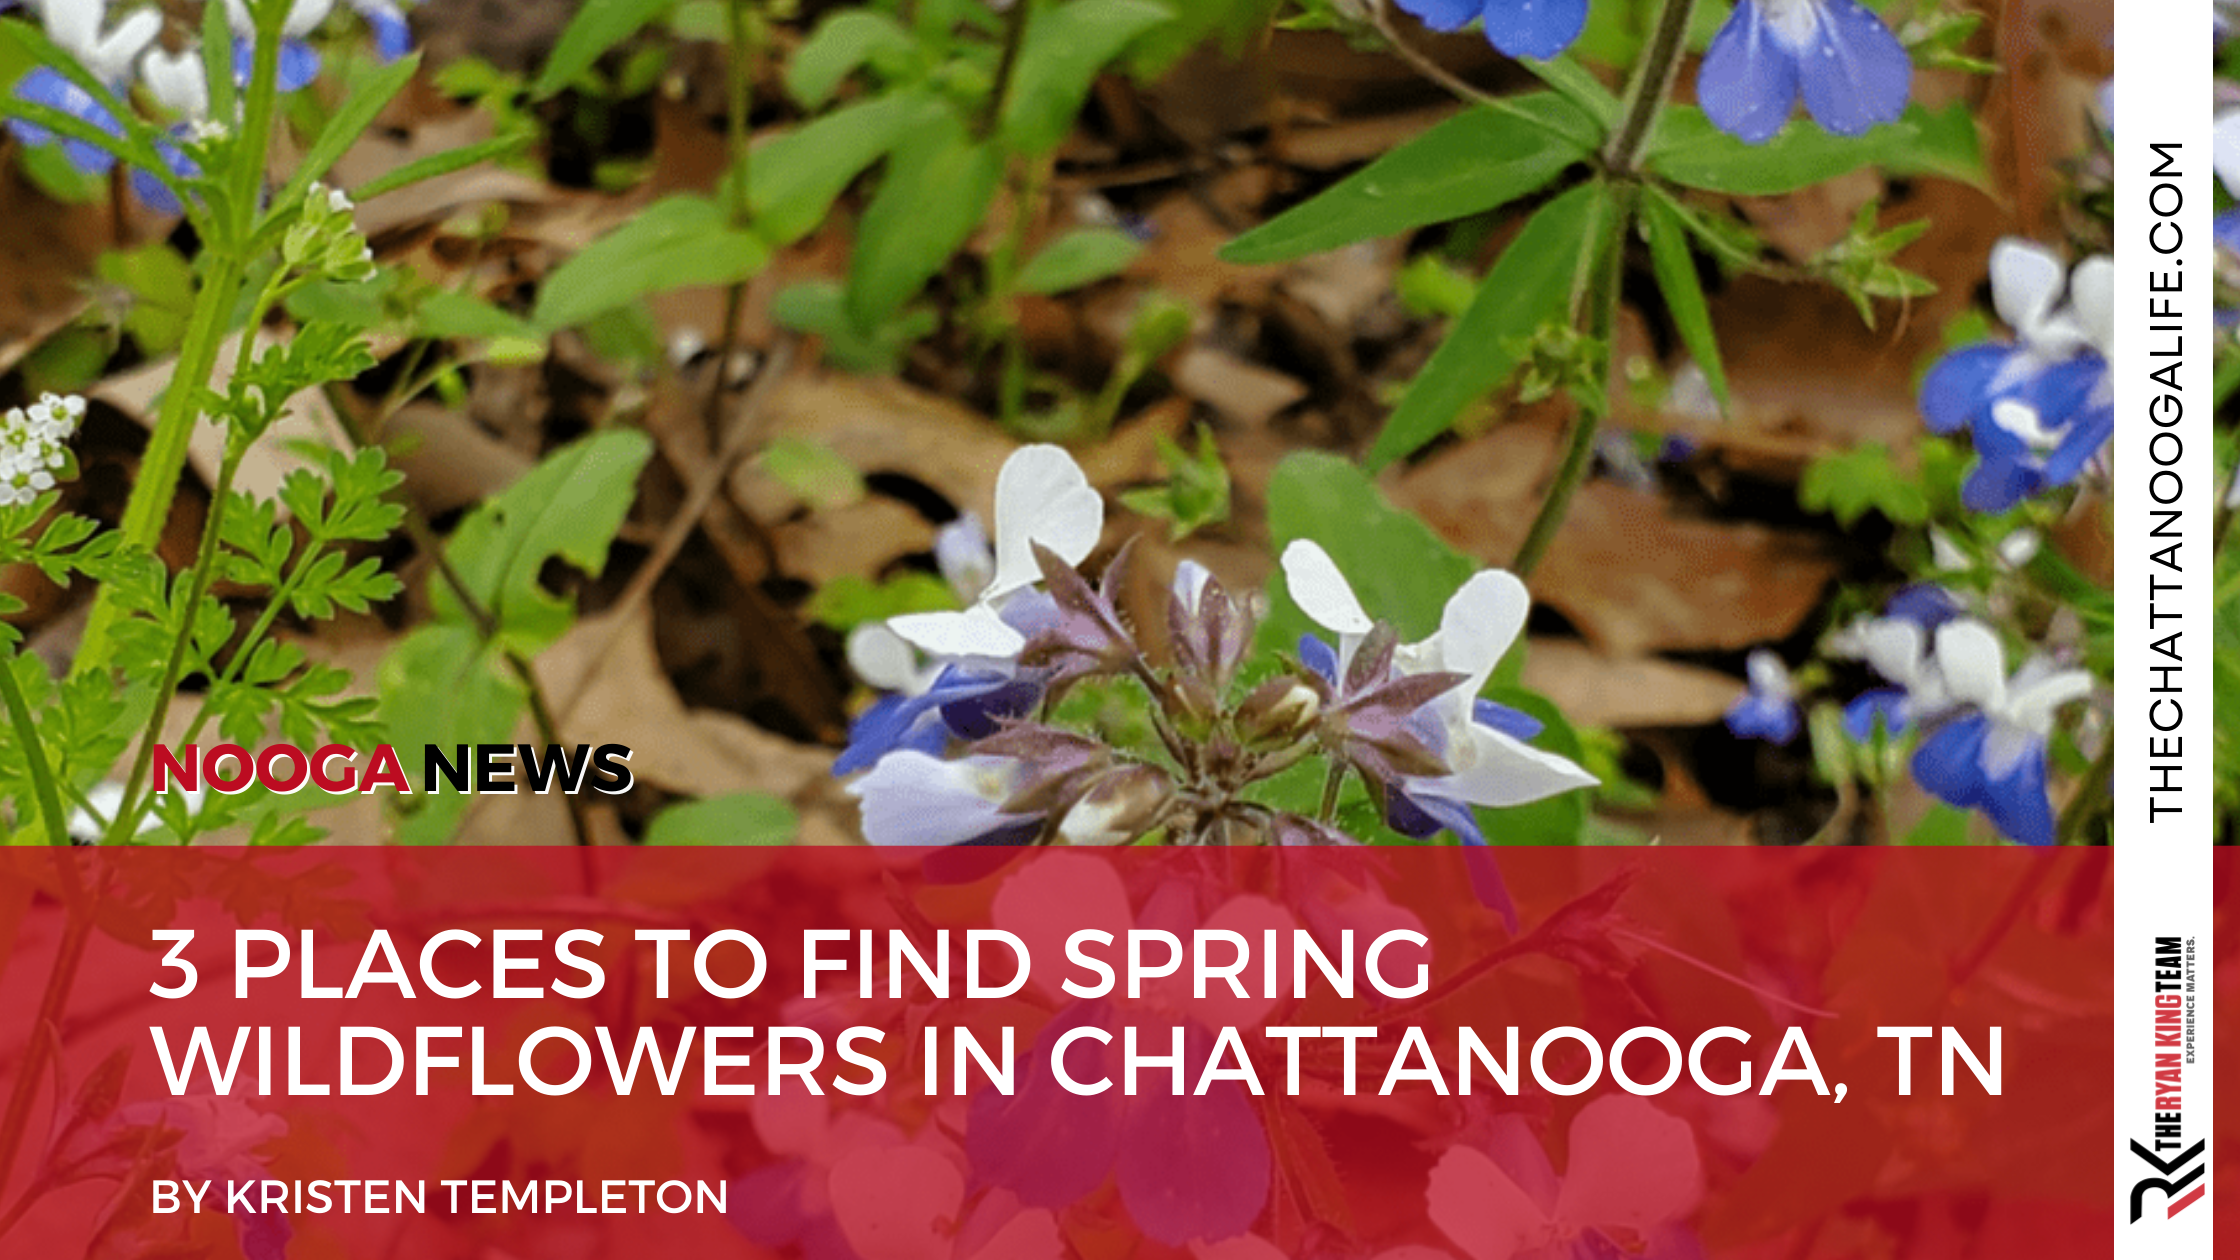 3 Places to Find Spring Wildflowers in Chattanooga, TN